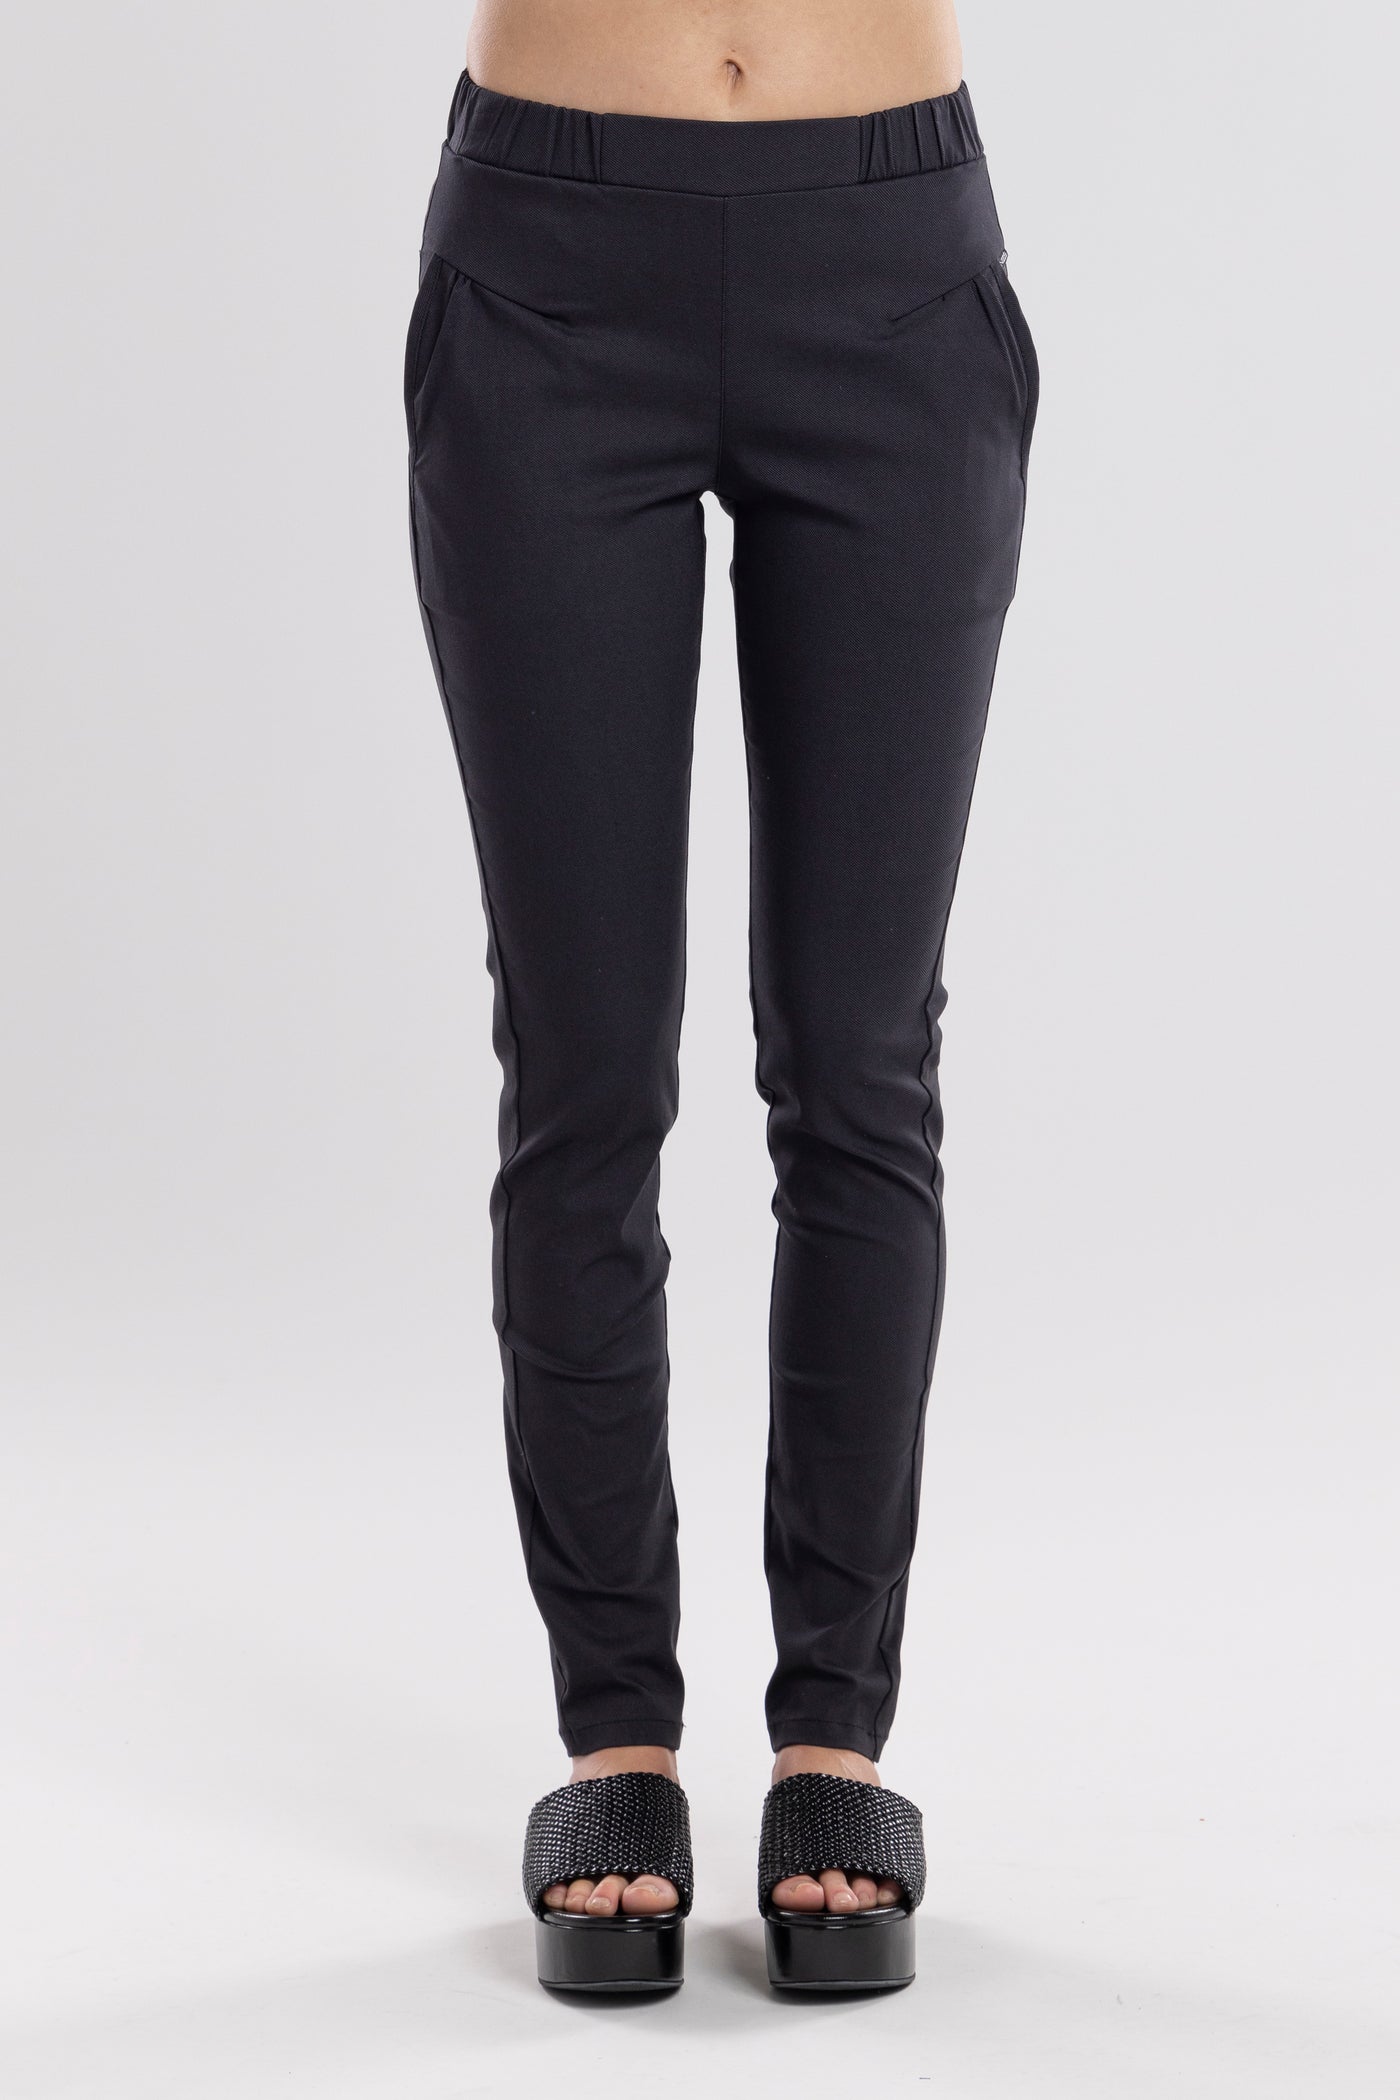 NES DARTSTA PANT  The Nes Dartsta pant are a wardrobe staple. The Dartsta pants have a tailored look and are crafted from a soft stretchy fabric for ultimate comfort. The Dartsta pants feature a side angled pocket, flat front and elasticated waist. The Dartsta pants are the perfect pant for work, special occasions or daily wear.  Worn perfectly back with any of the Nes tops 